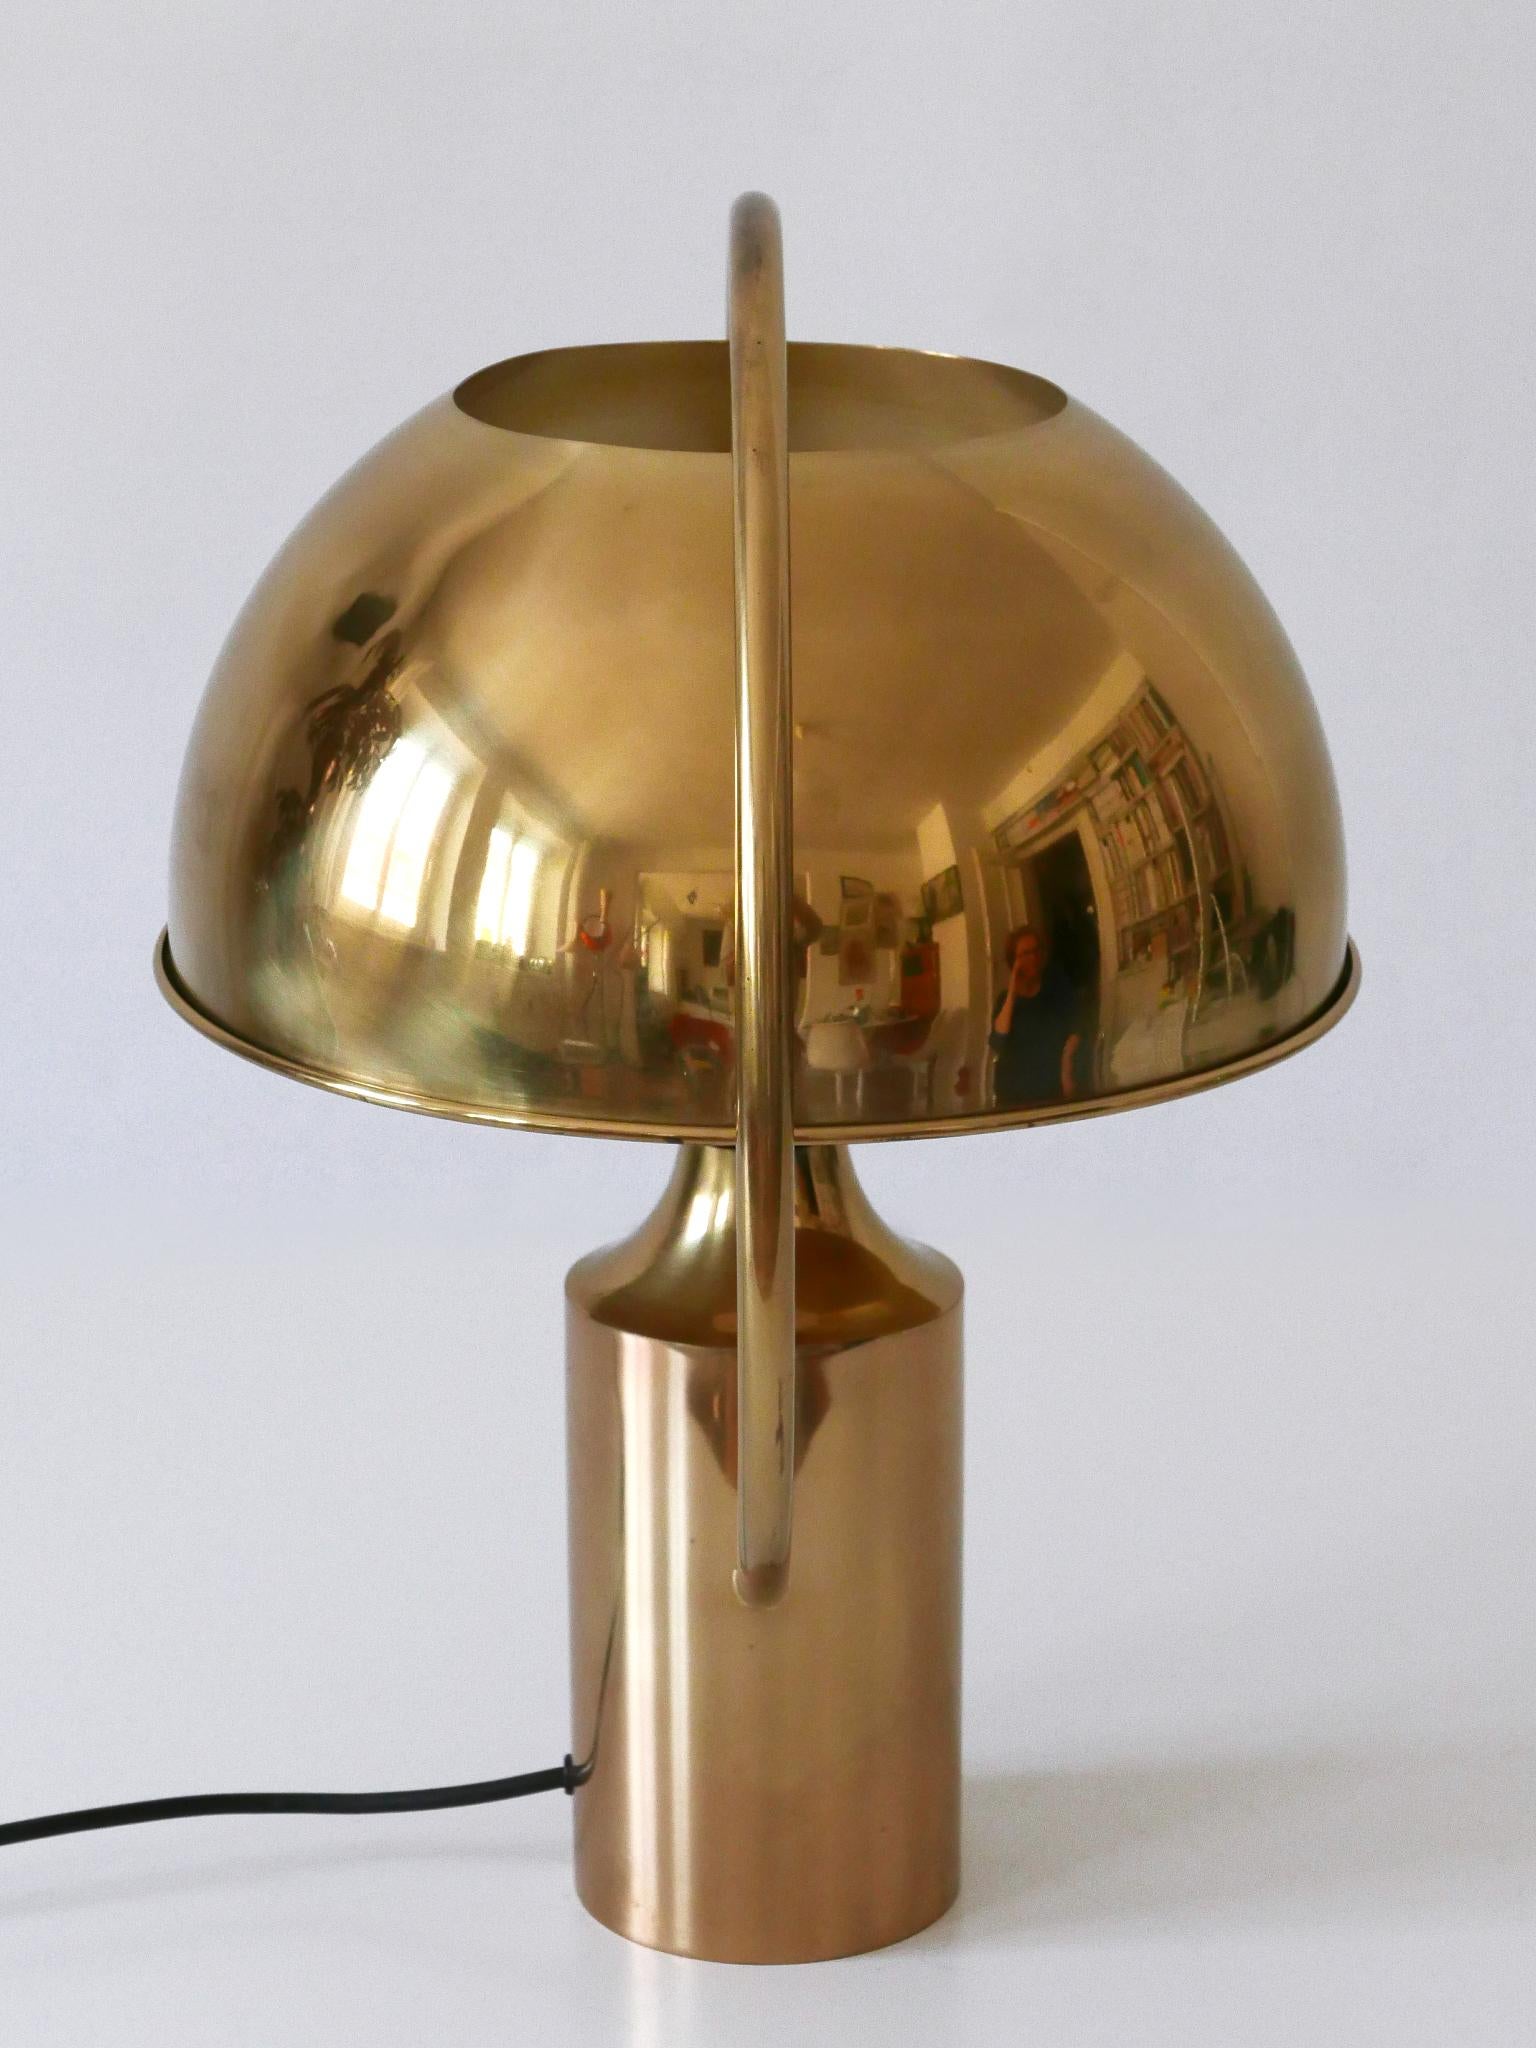 Extremely Rare Mid-Century Modern Table Lamp by Florian Schulz Germany 1970s For Sale 10